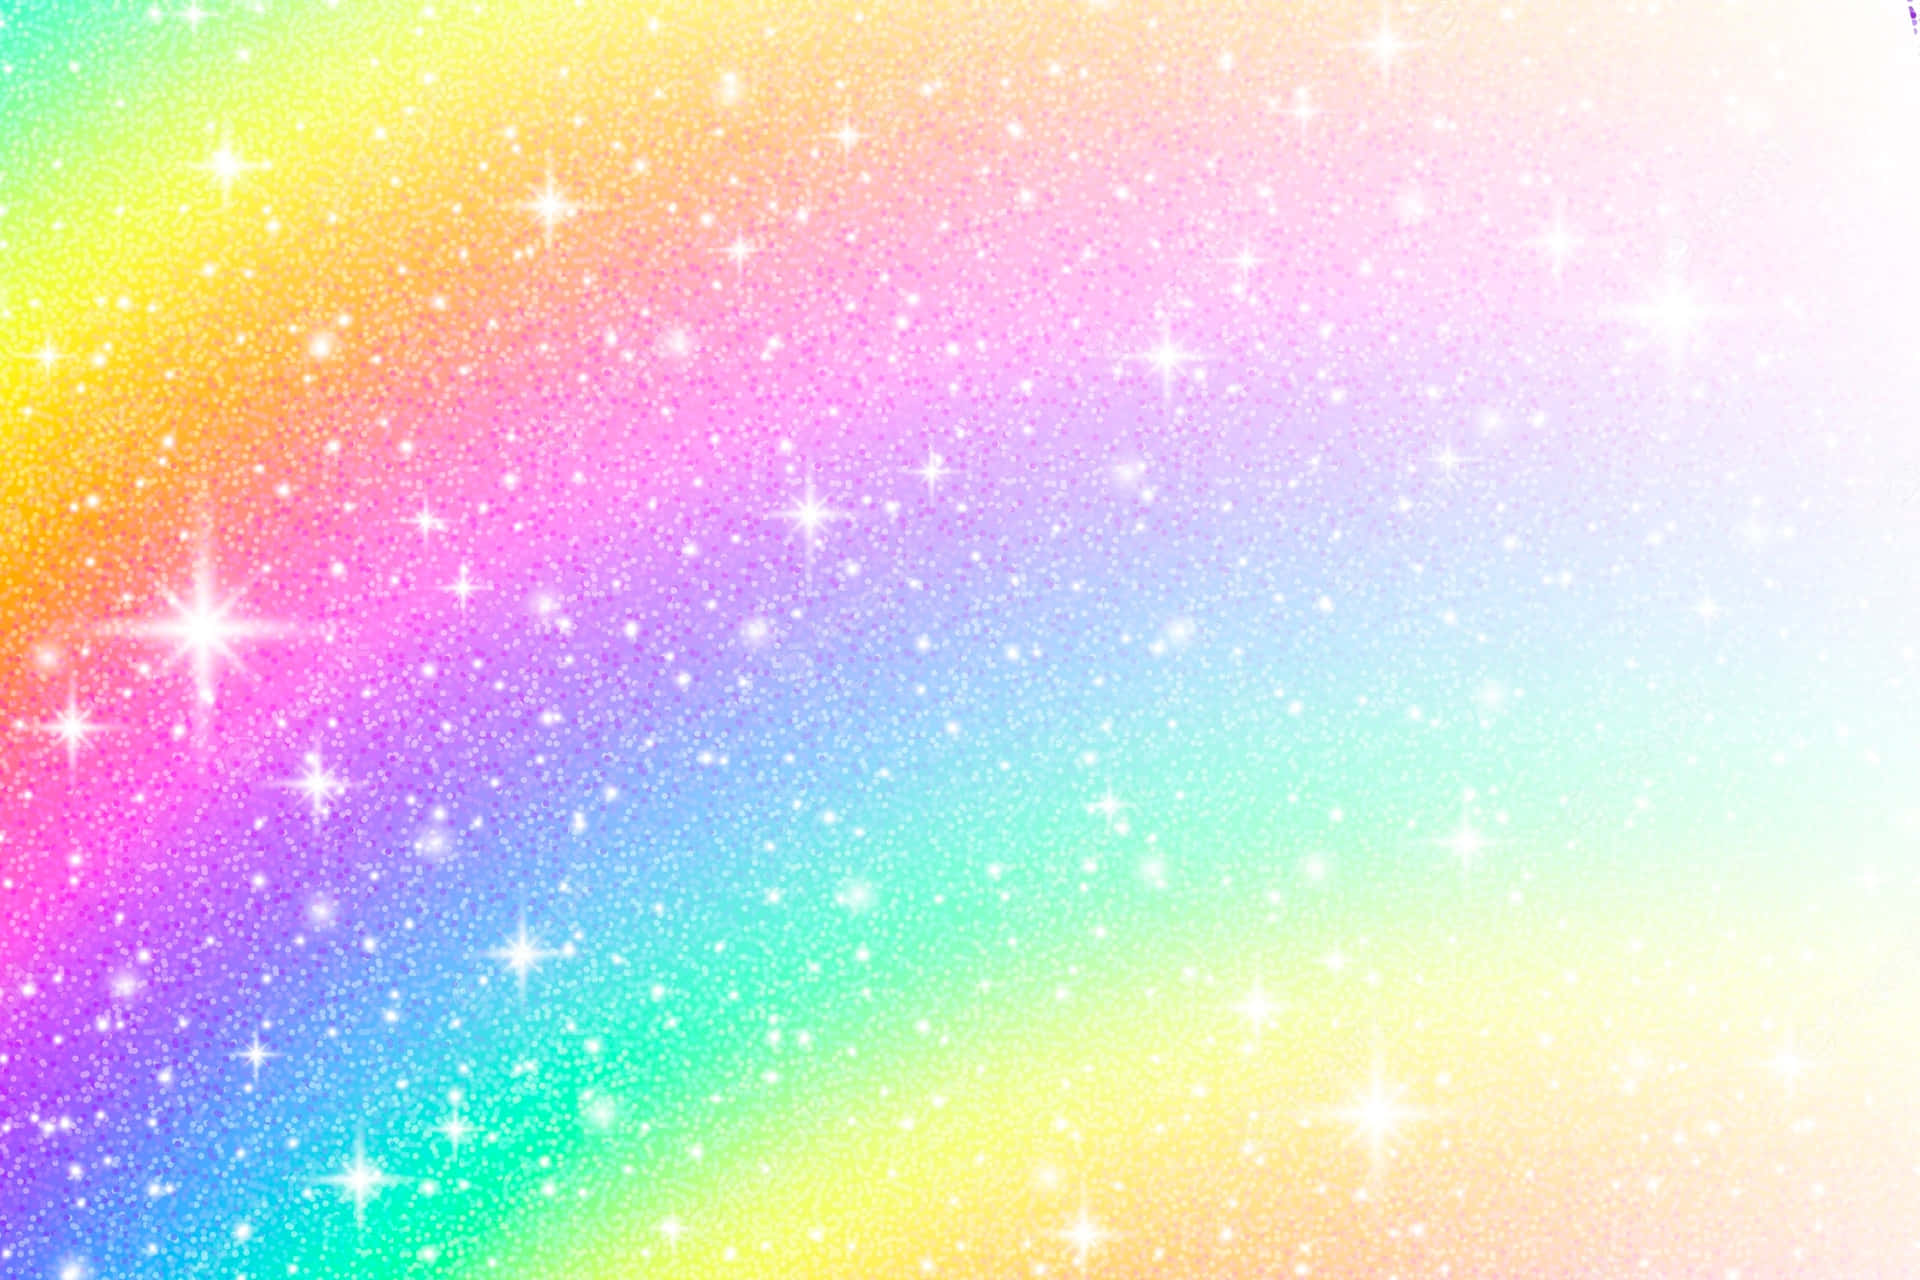 Shine Bright with Glittery Backgrounds